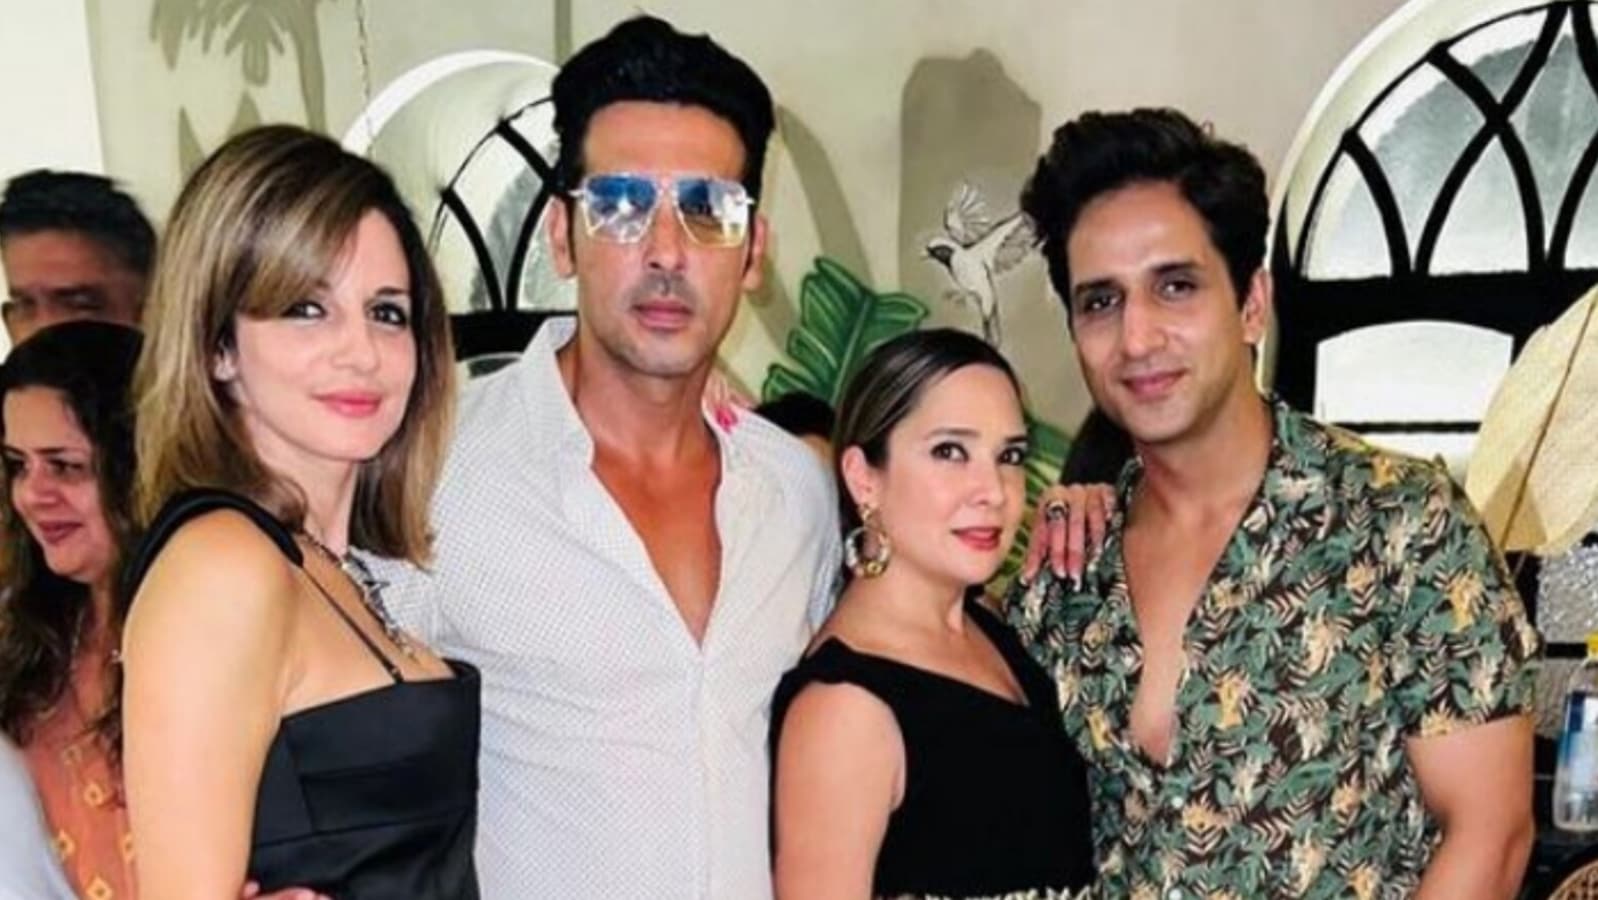 Zayed Khan on Sussanne Khan and Arslan Goni: Who am I to say anything?